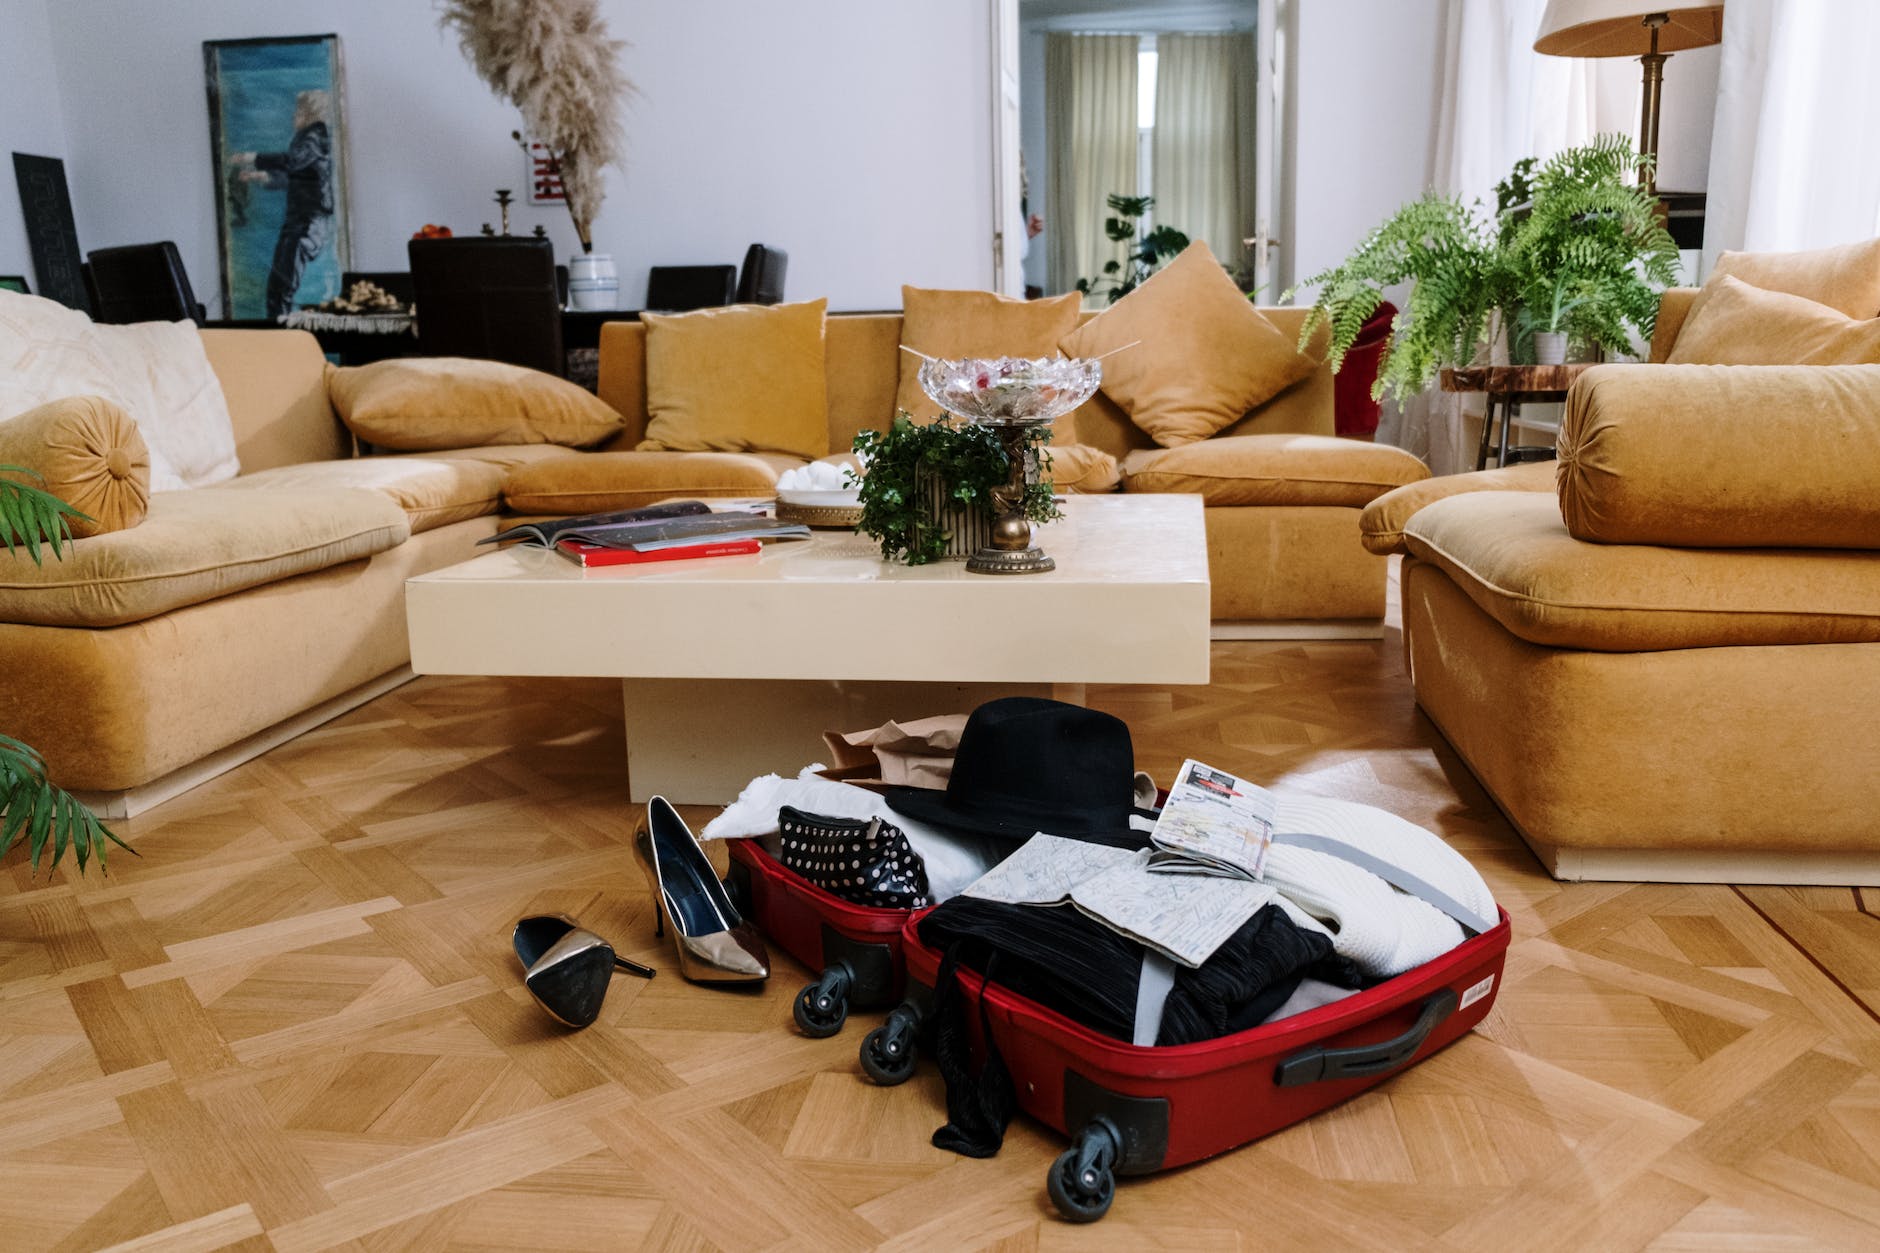 a suitcase with clothes on a wooden floor near the couch